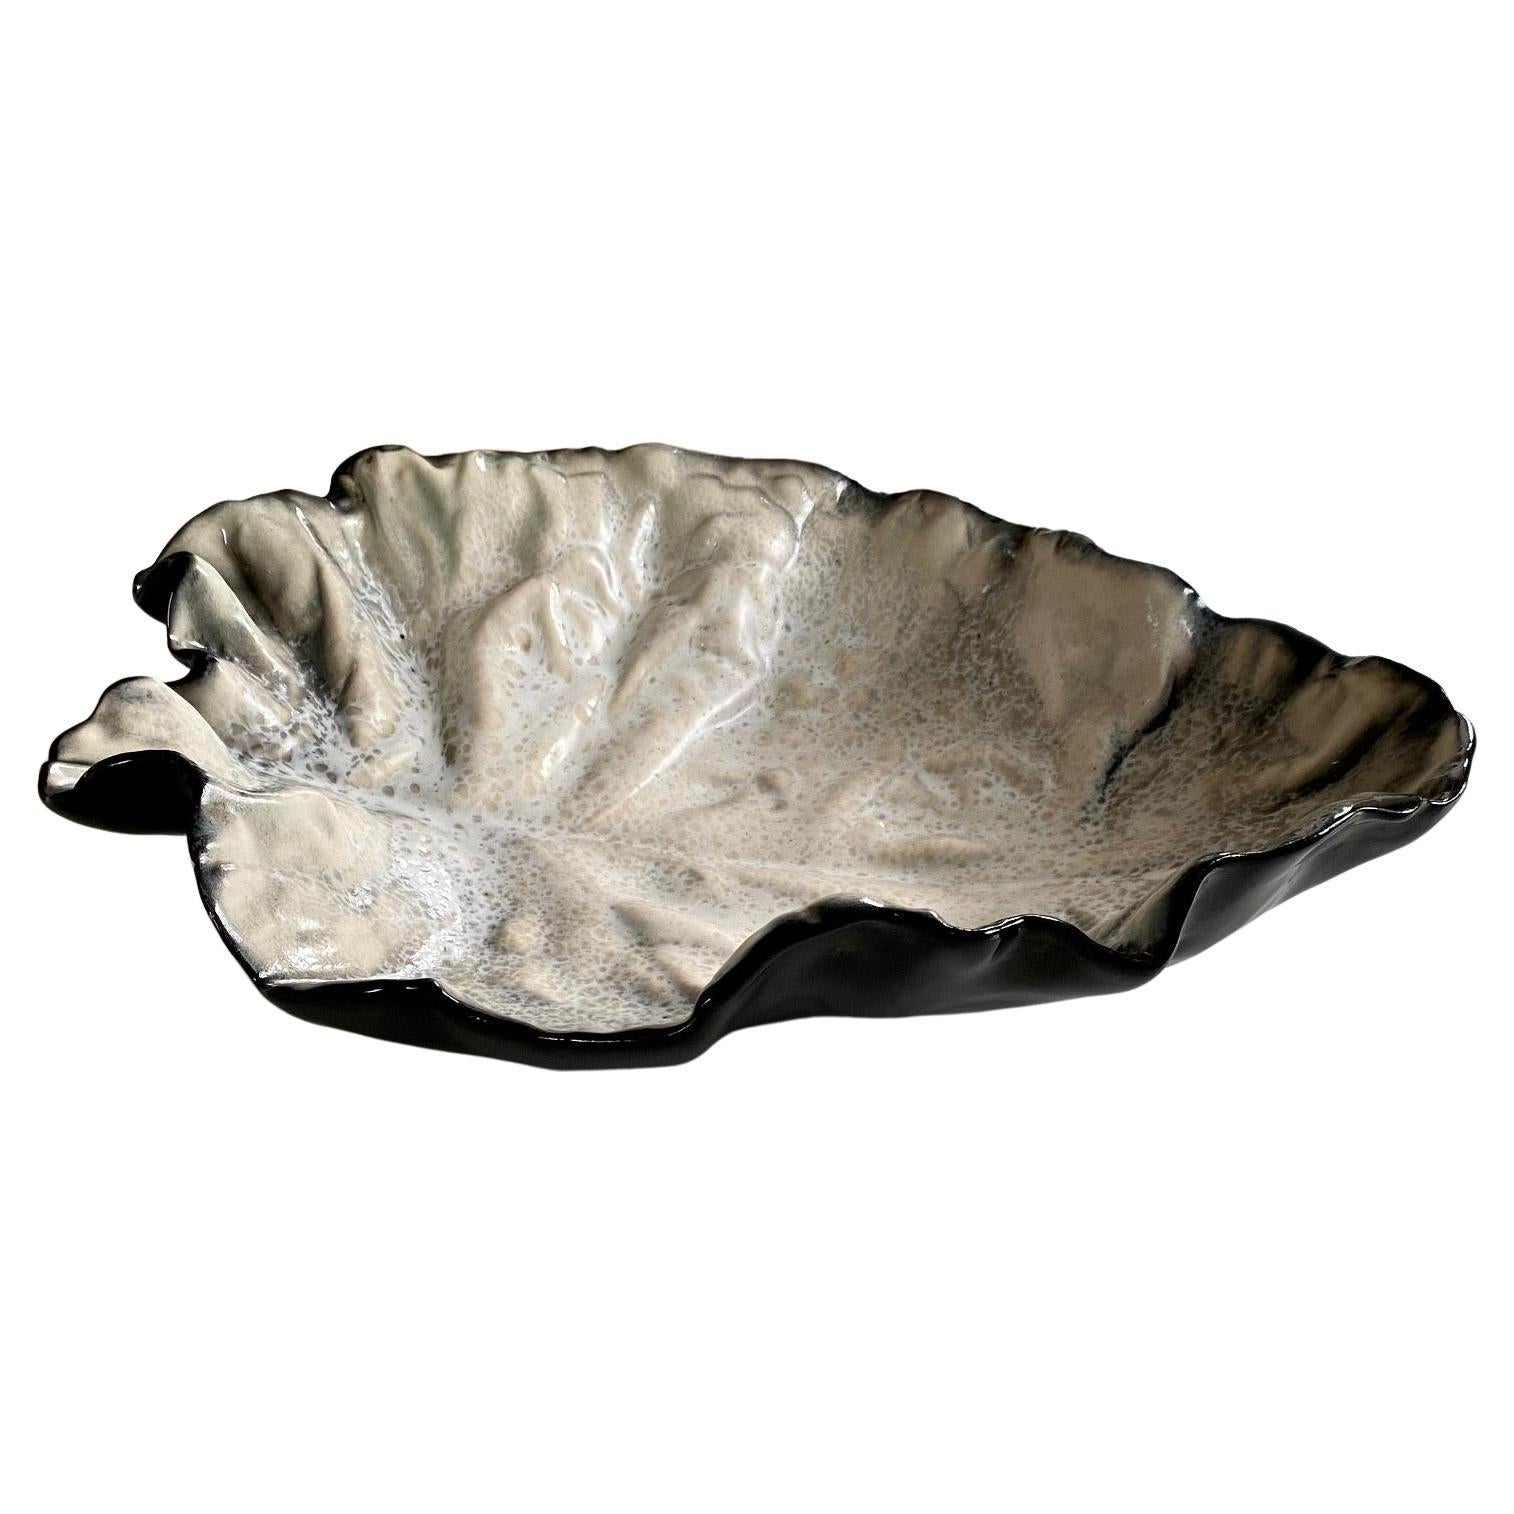 Large Ceramic Decorative Dish or Vide Poche "Leaf" Signed by Pol Chambost 1950s For Sale